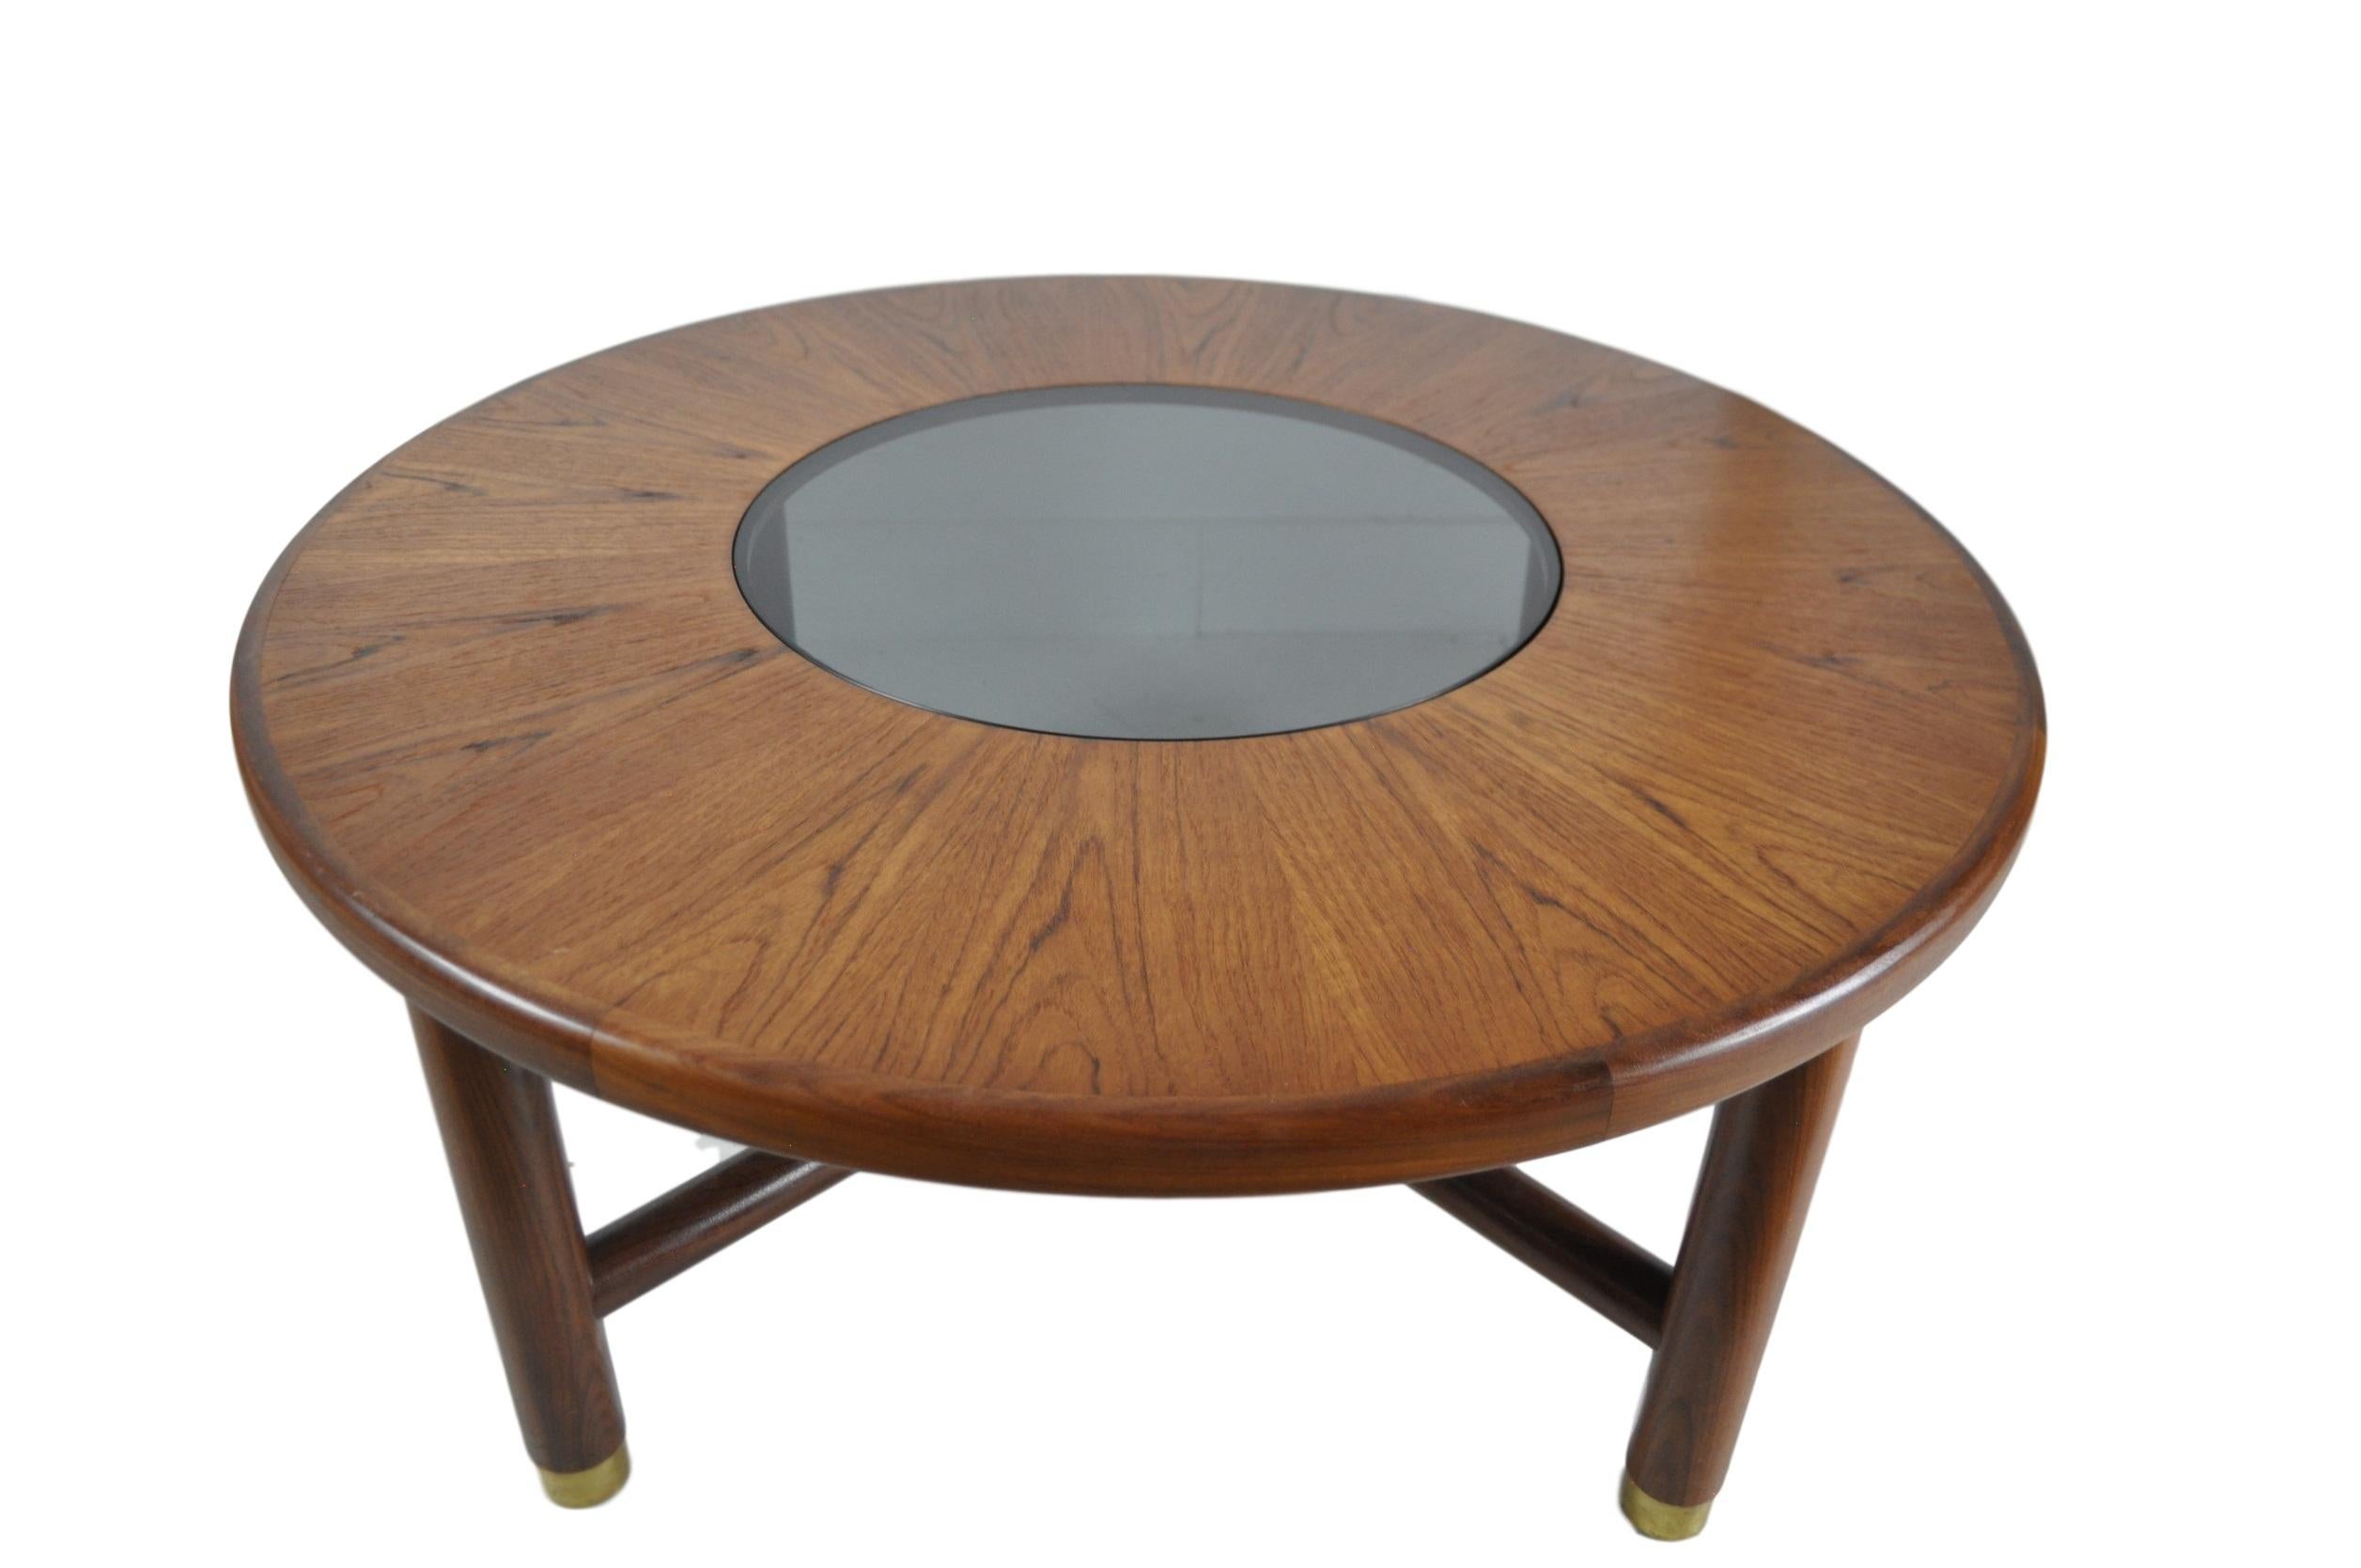 Rare round teak and smoked glass coffee table by G-Plan, circa 1960. This particular table is of the darker teak variant and some minimal wear around the brass plate leg detailing.